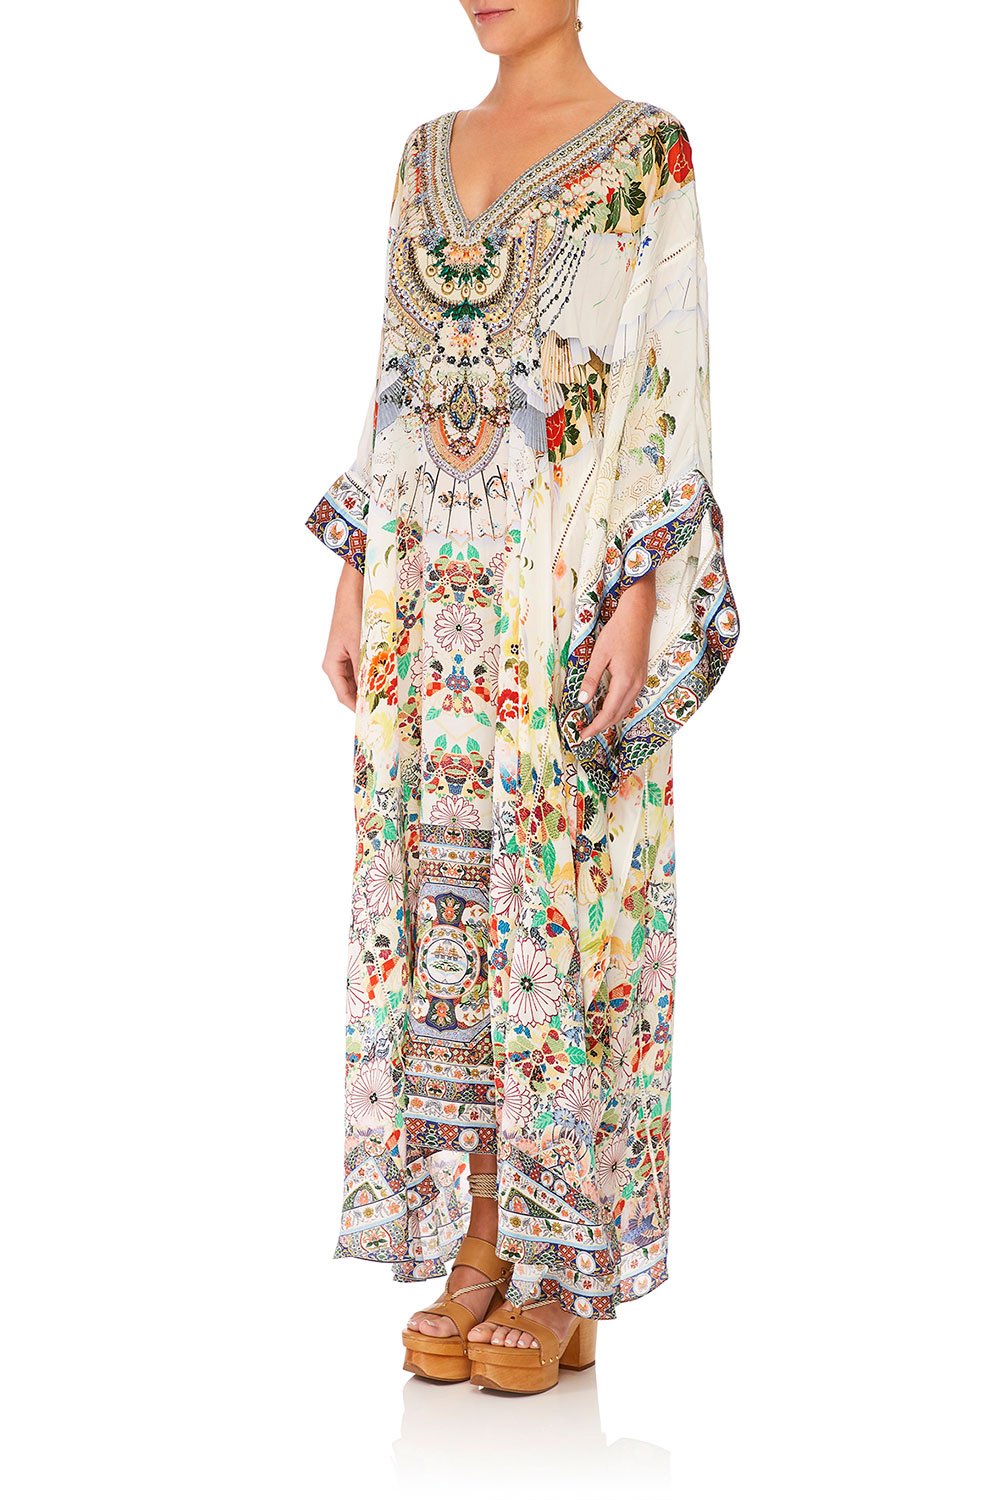 KAFTAN WITH SHEER SLEEVE TIME AFTER TIME – CAMILLA